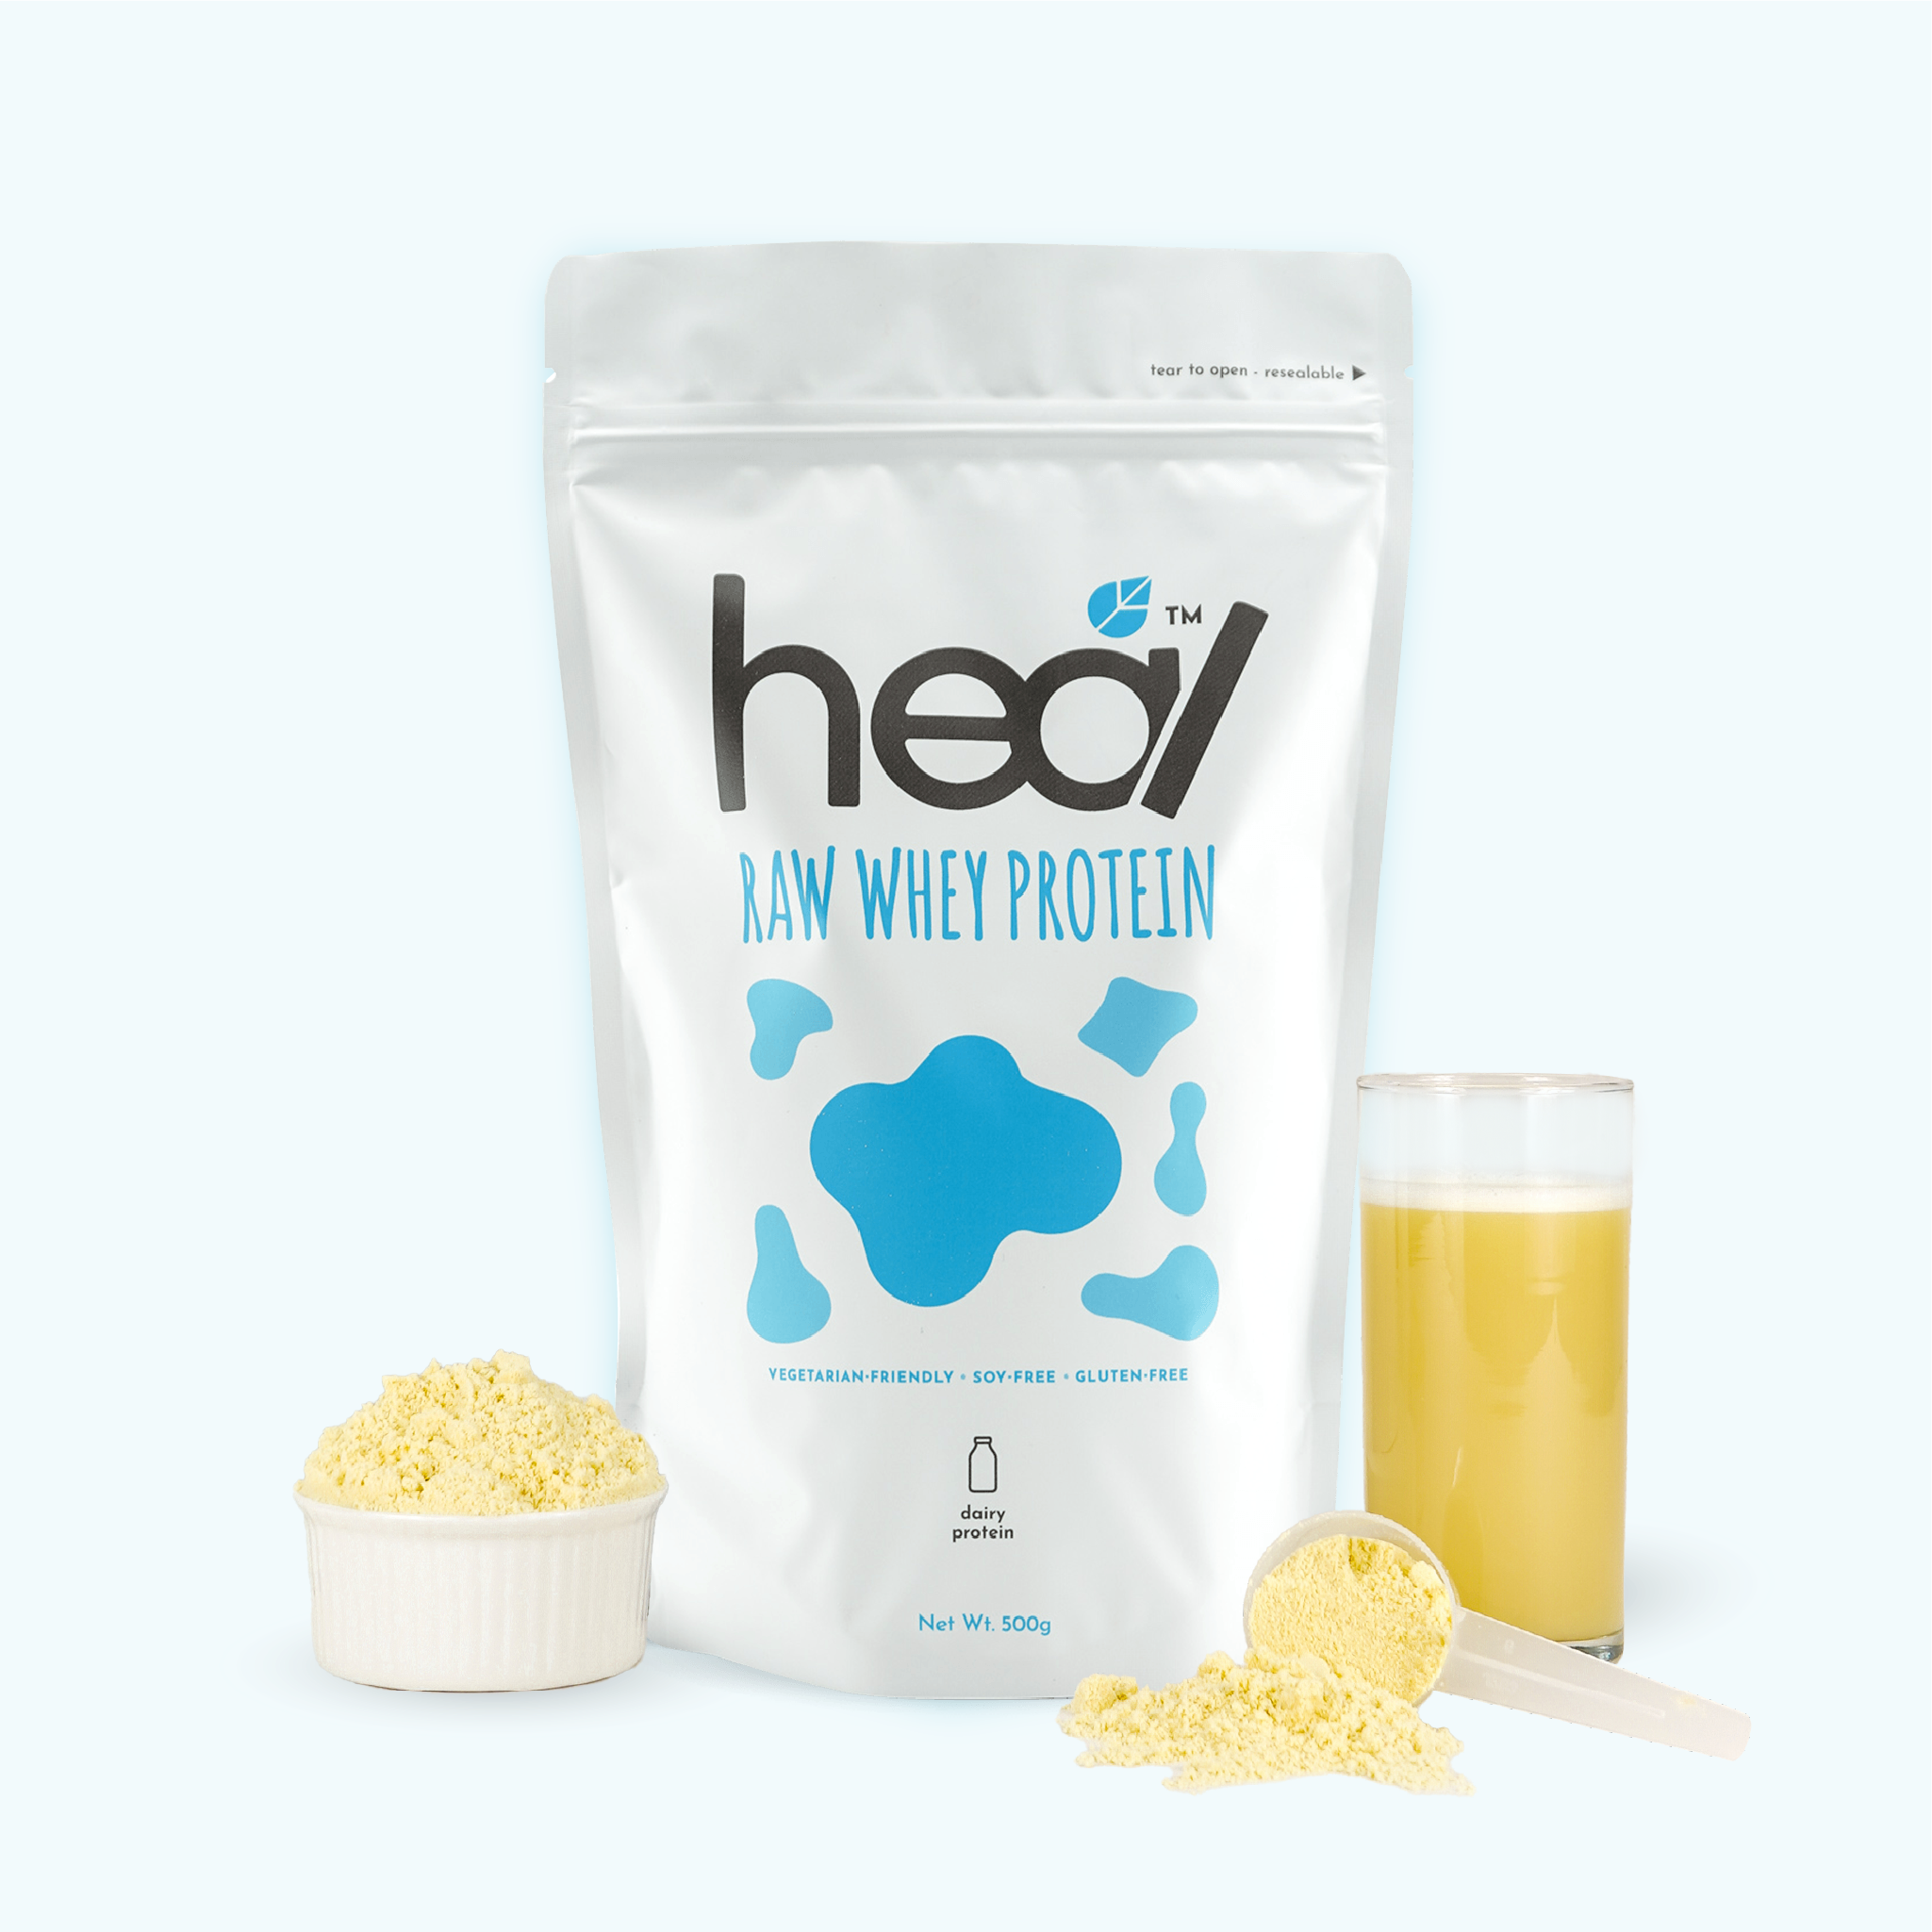 [Subscription Plan] Heal Raw Whey Protein, 500g